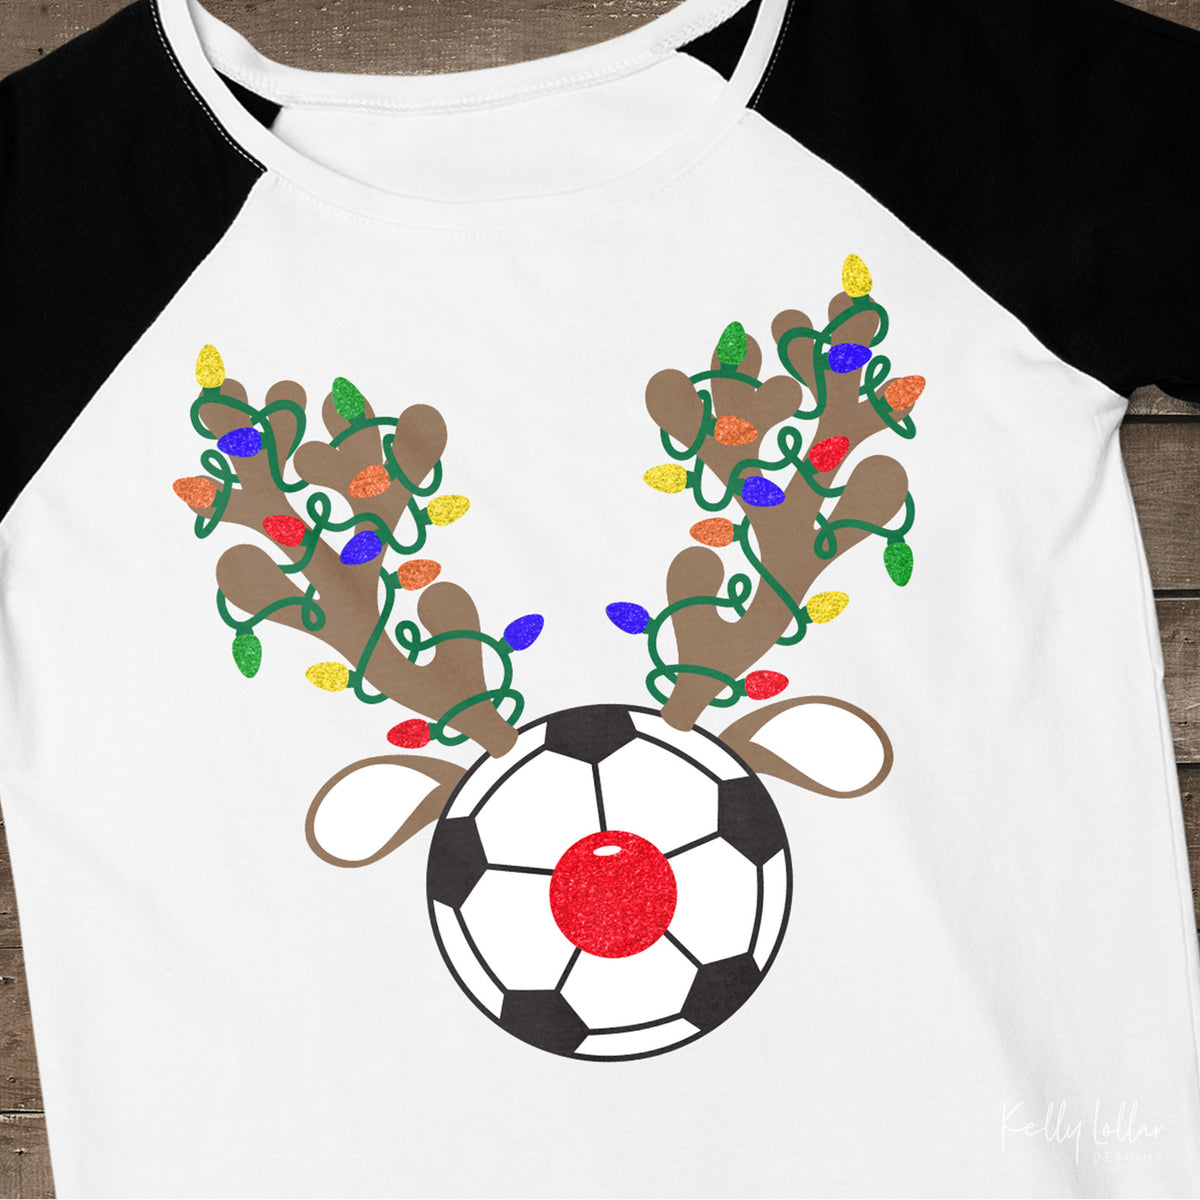 Christmas Light Wrapped Reindeer Antlers and Ears on a Soccer Ball for Holiday Shirts and Decor | SVG DXF PNG Cut Files